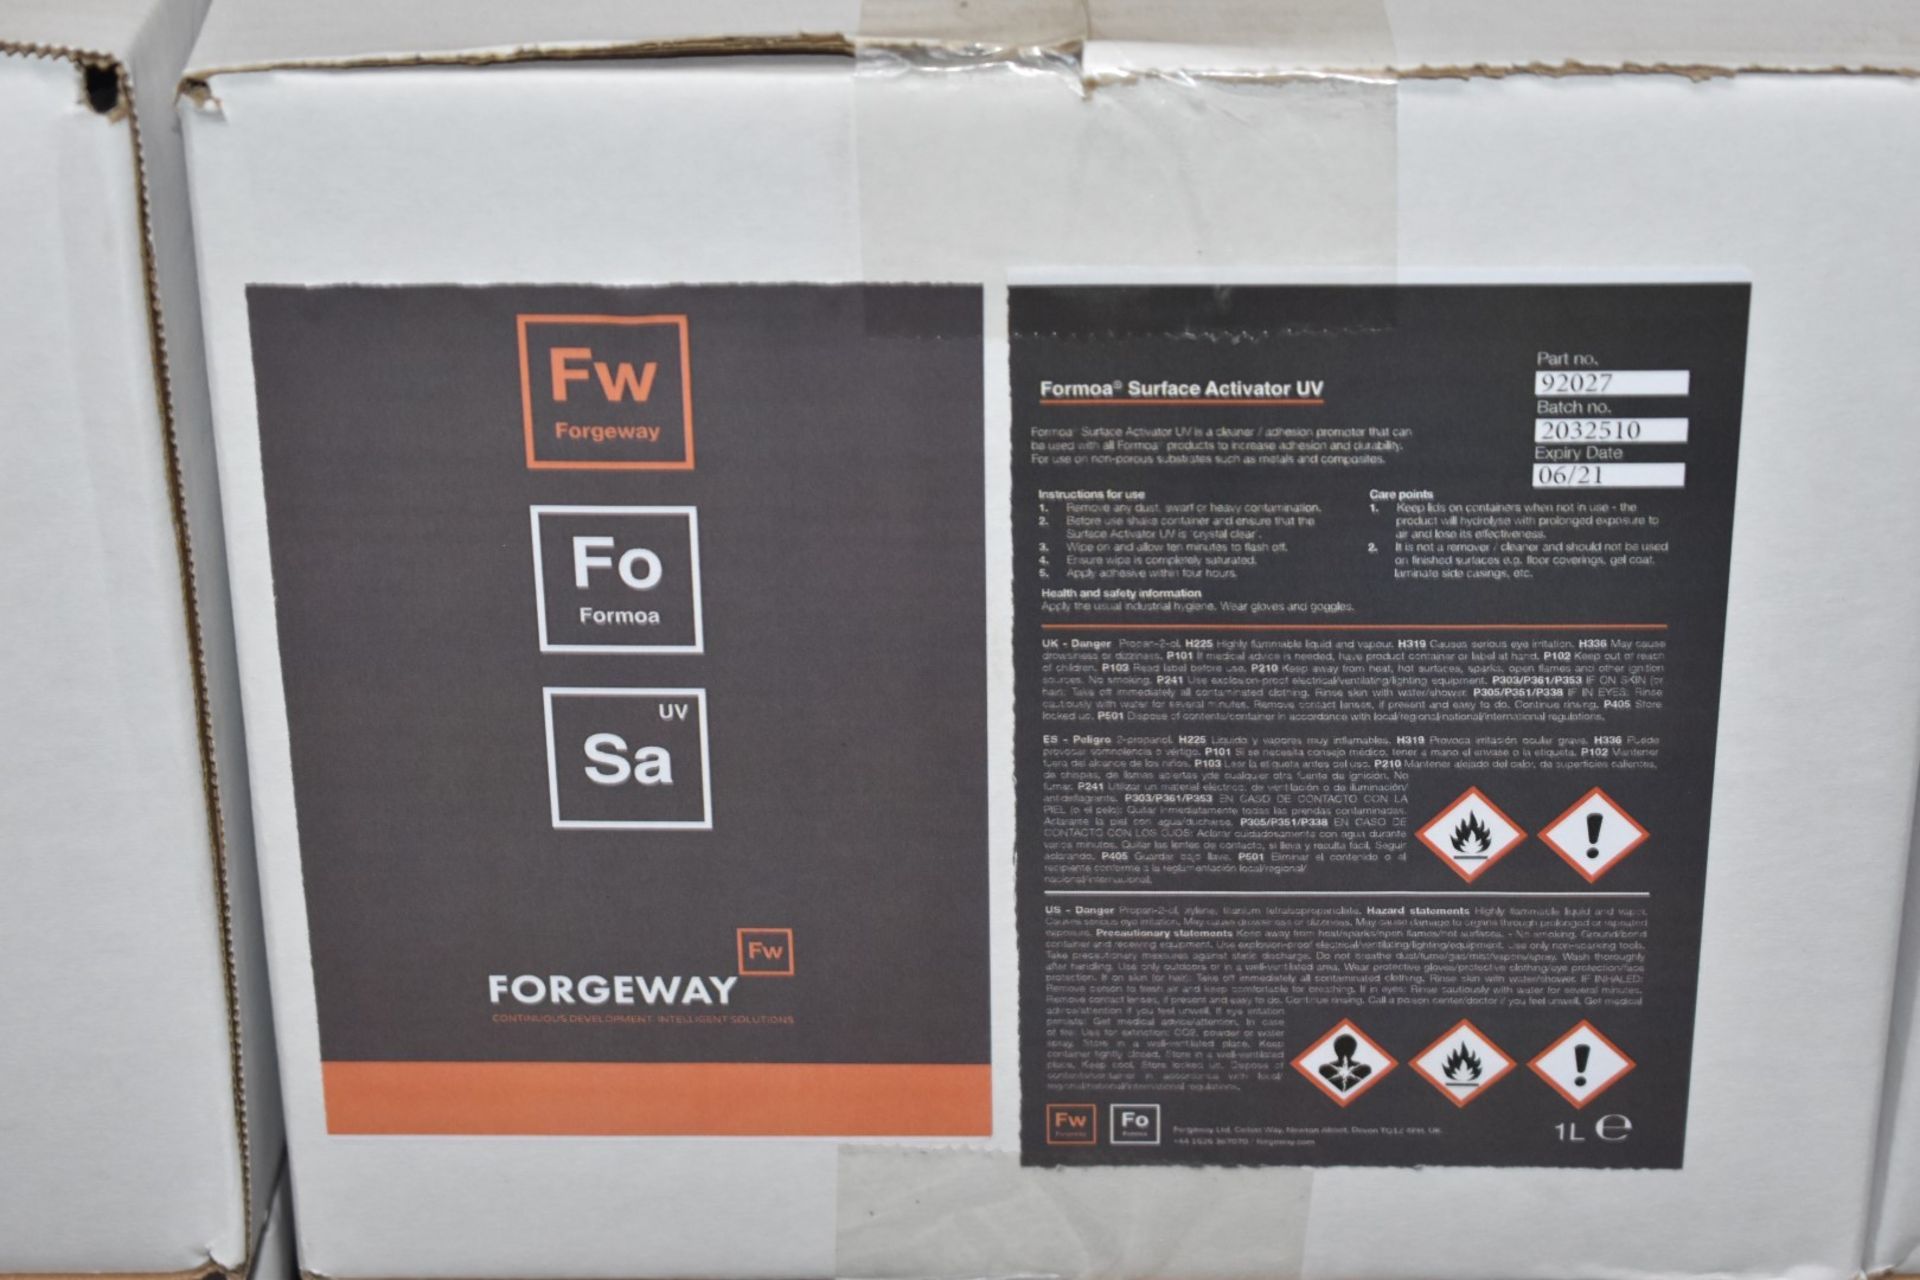 12 x Forgeway Formoa Surface Activator 1 Litre Containers - Adhesion Promotor, Cleaner, Degreaser - Image 5 of 6